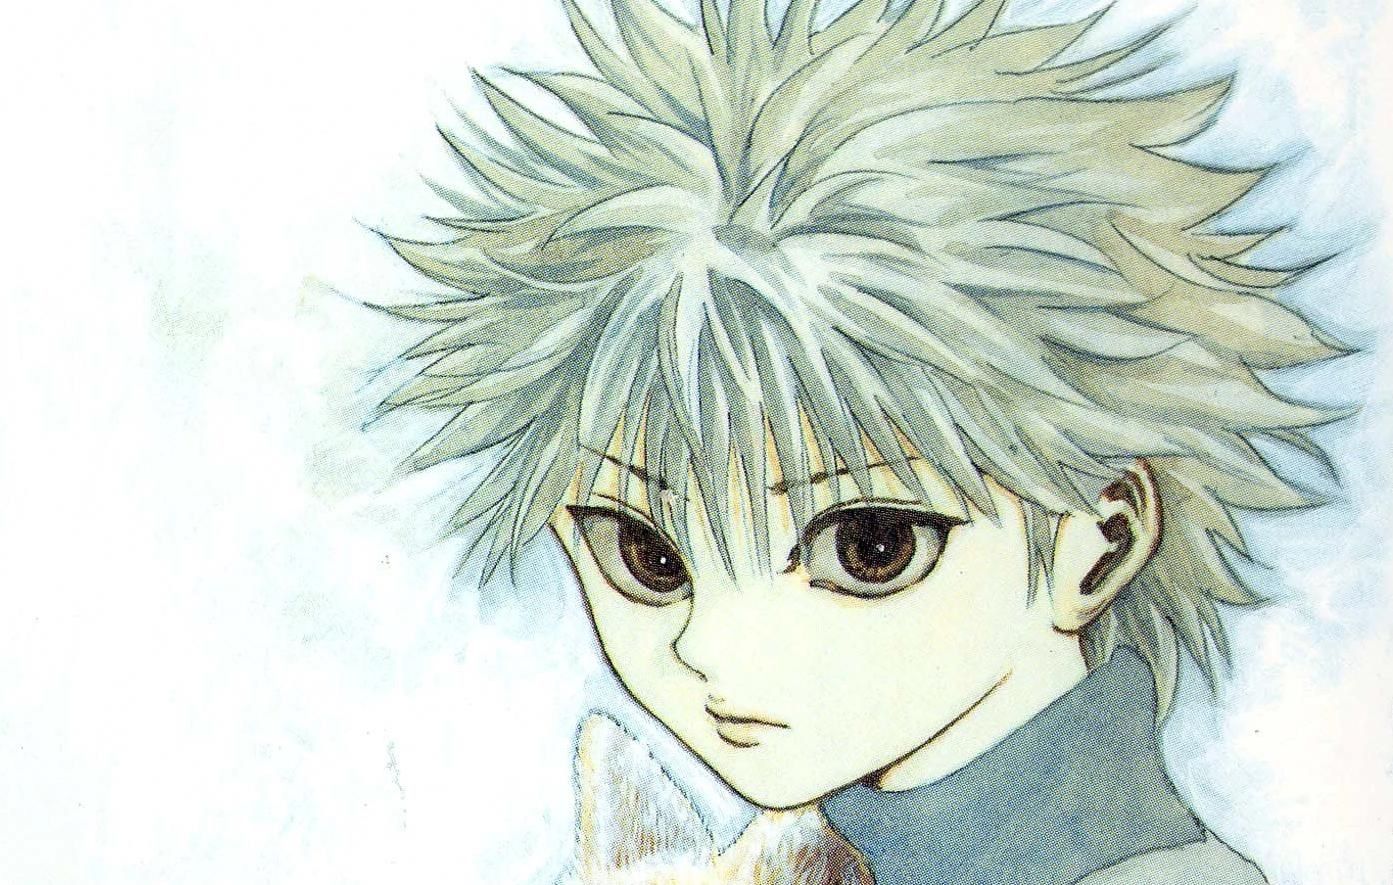 Togashi Teases Another Hunter x Hunter 10 Chapters Batch Coming Soon